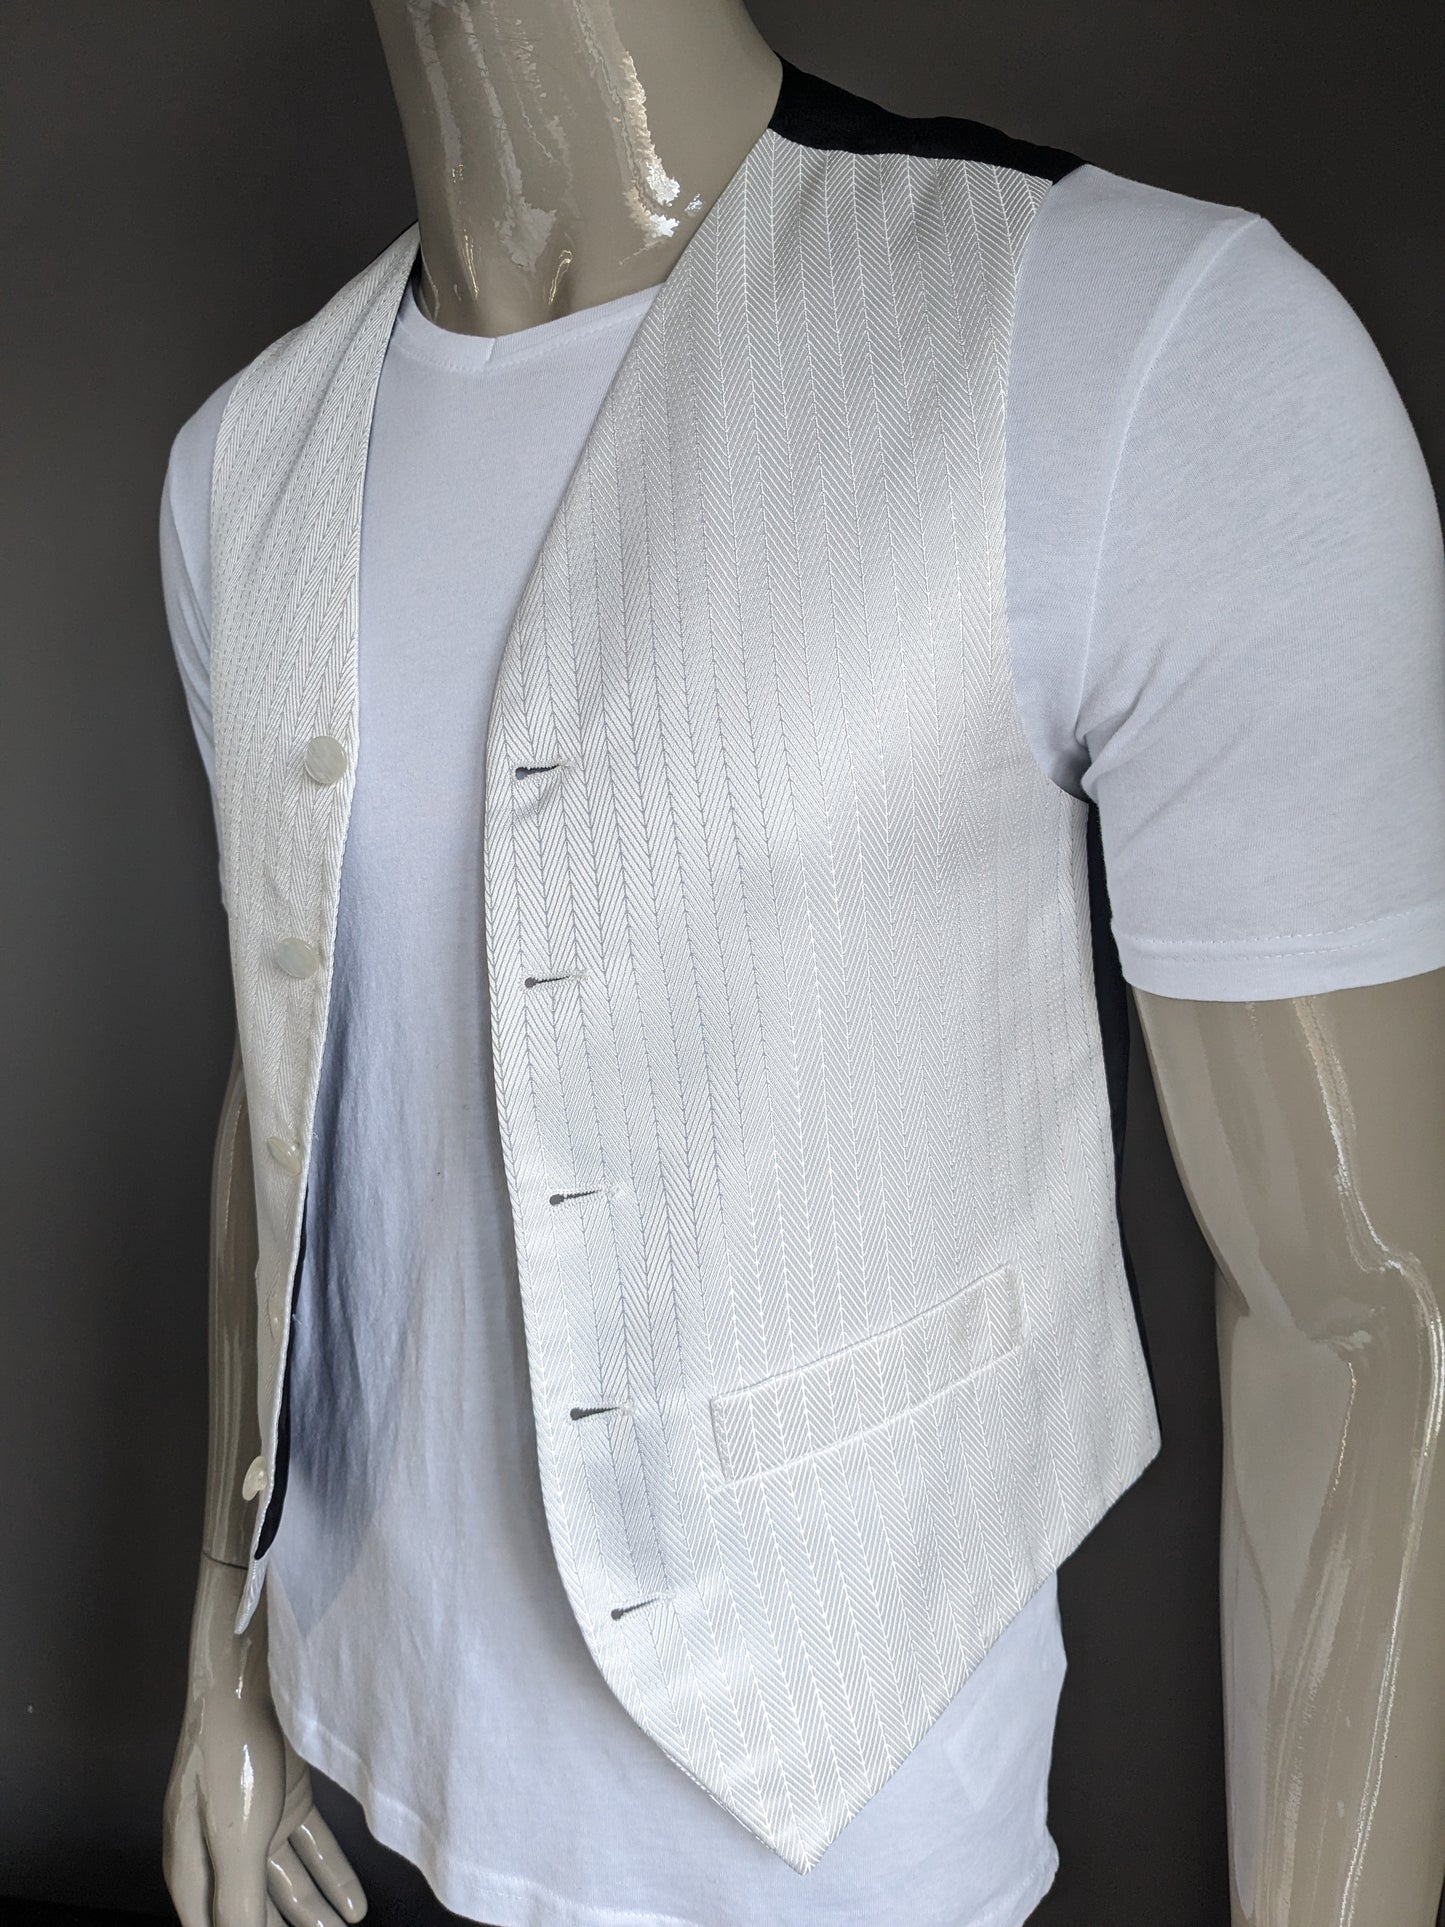 FH waistcoat. White silver -colored motif. Size S.